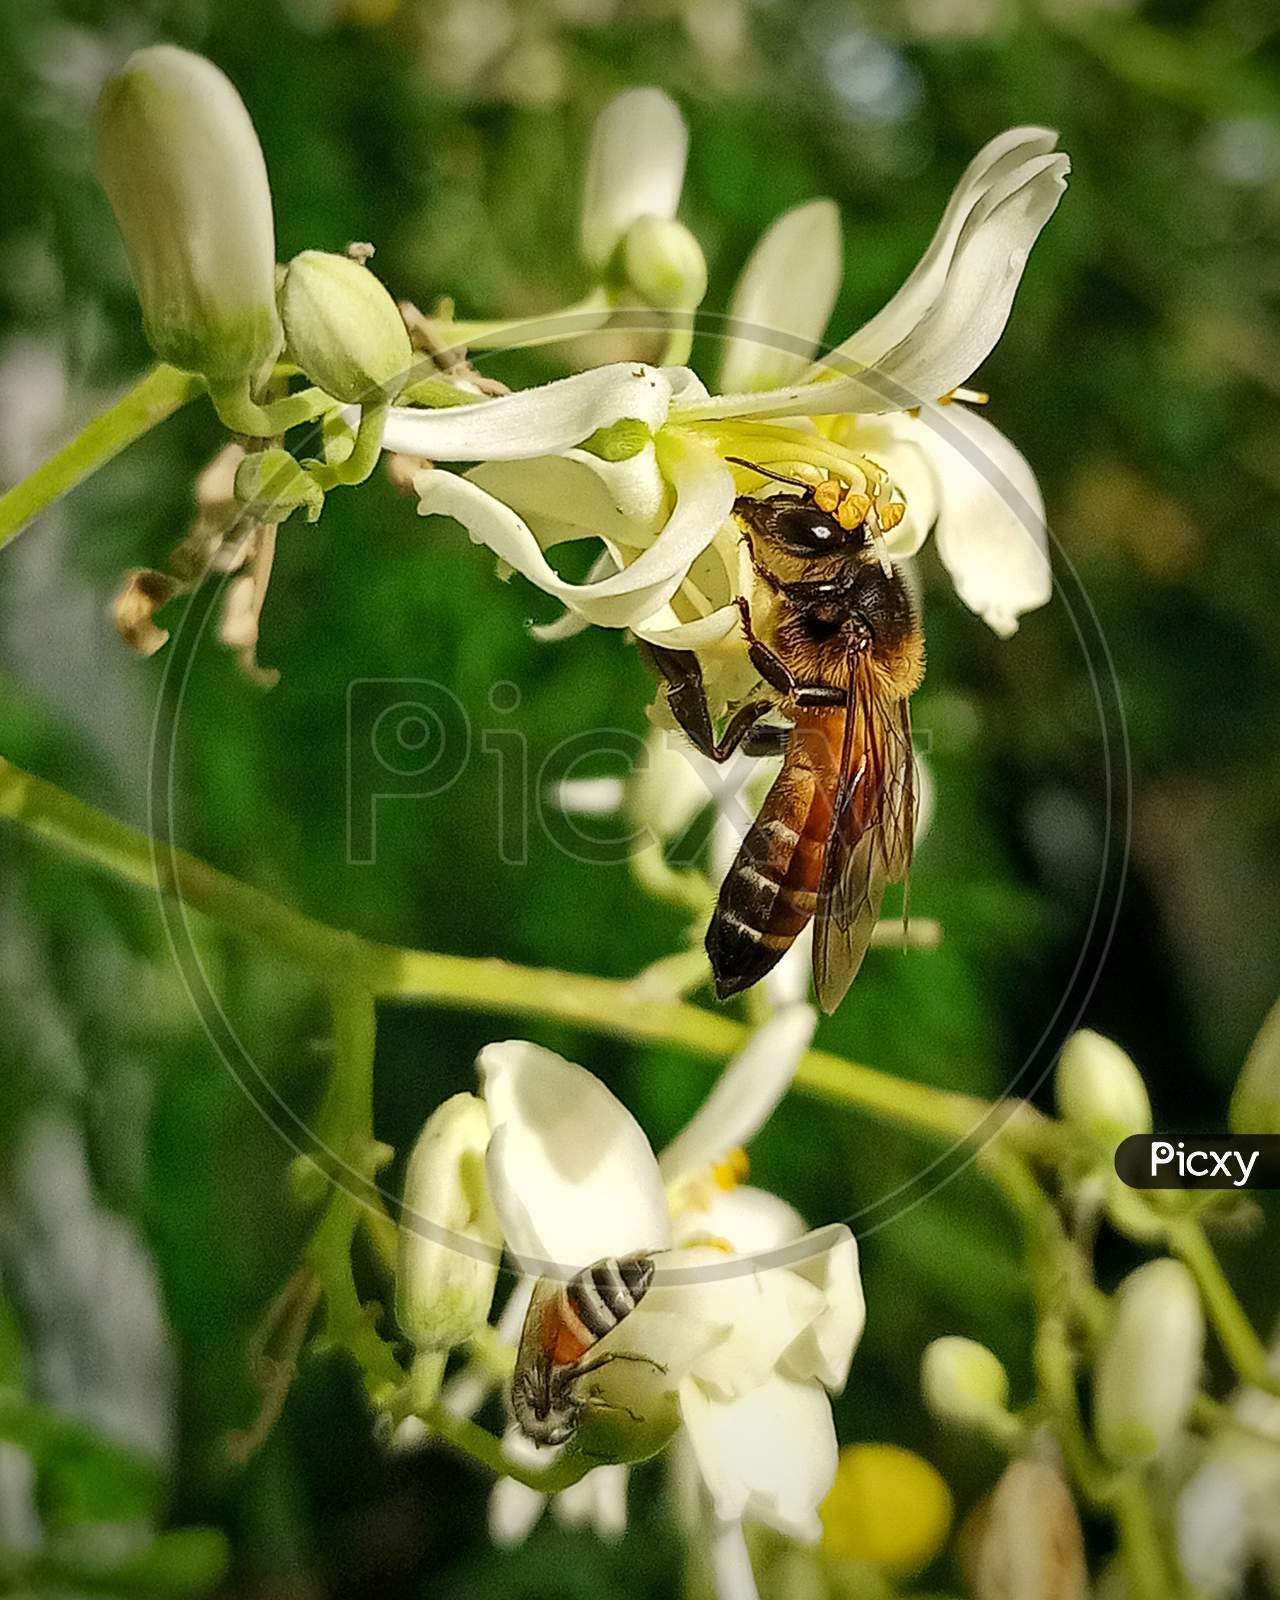 Honeybee getting its meal and helping pollination.